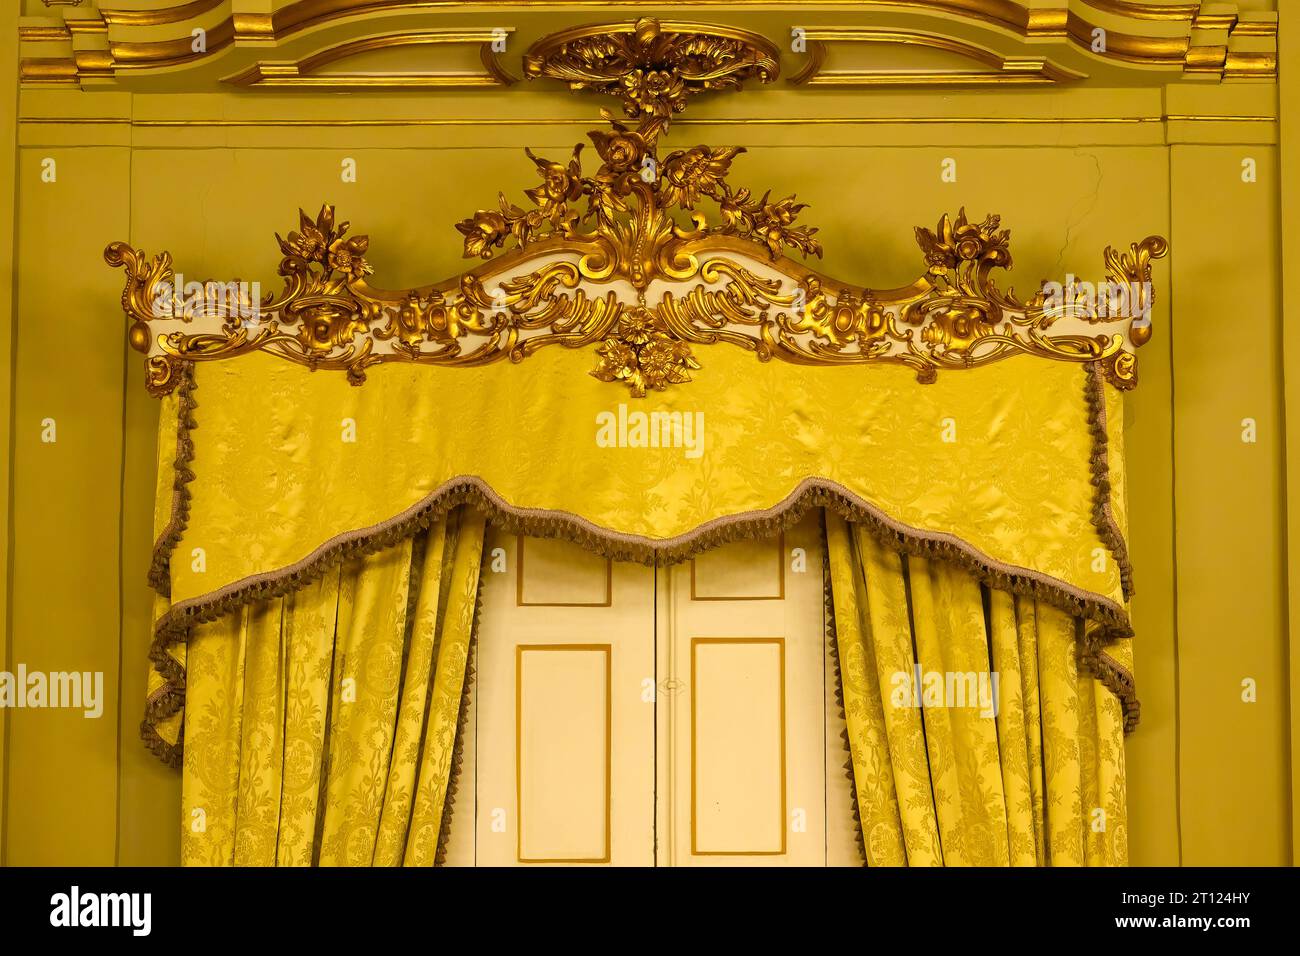 Drape holder in a door. Gold-colored luxurious decorations in the architecture of an interior room. Stock Photo